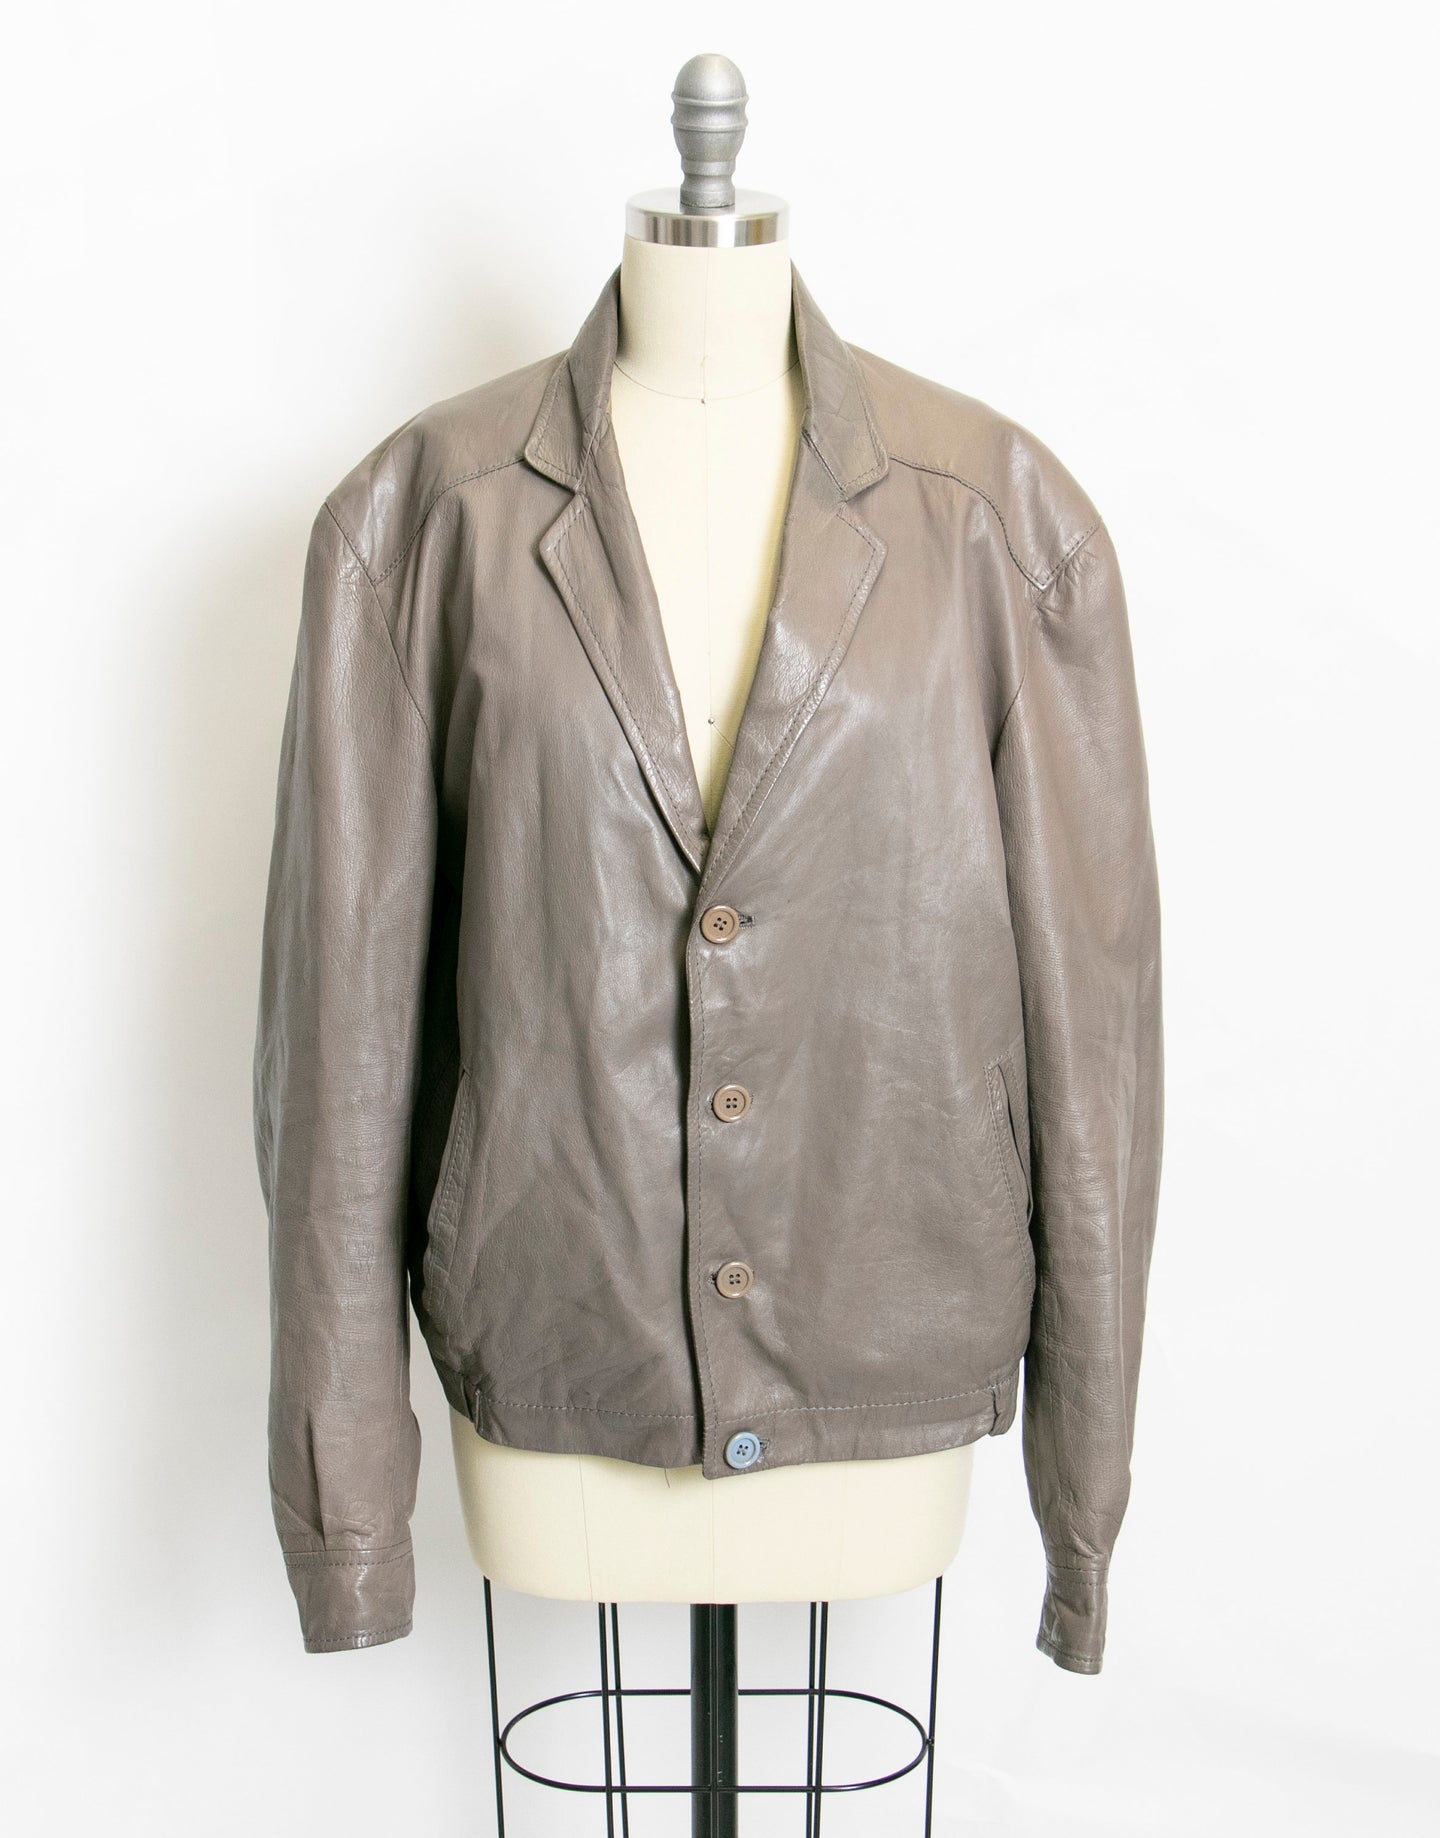 1980s Leather Jacket Taupe 80s Large